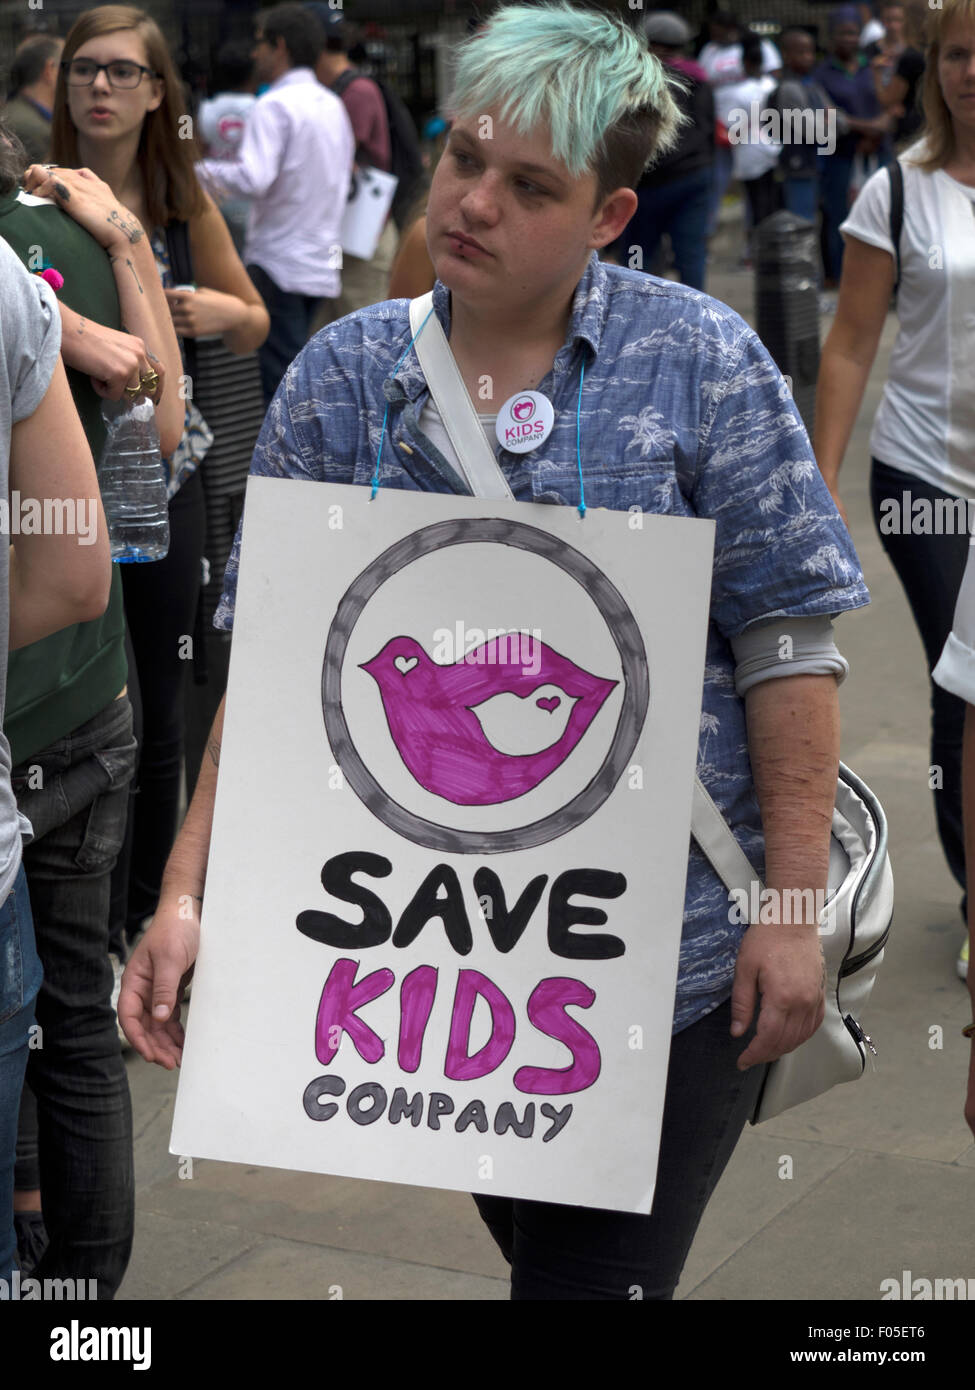 Whitehall, London, UK, 7 August 2015. A protester taking part in a demonstration opposite Downing Street aimed at saving Kids Company parades a placard. Credit:  Richard Slater/Alamy Live News Stock Photo